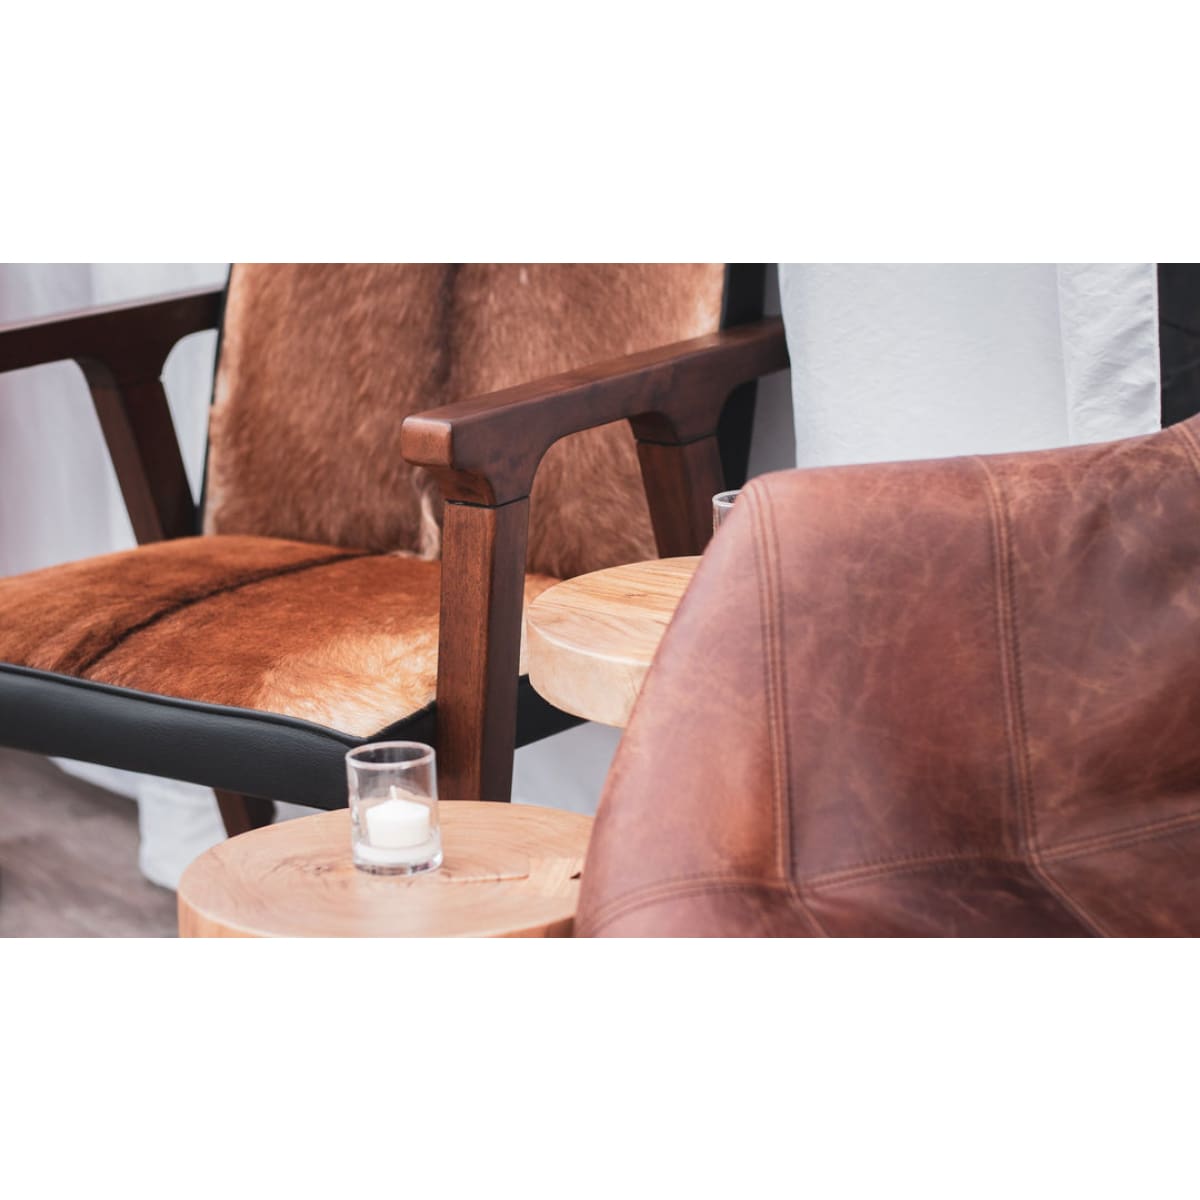 Rio Cool Armchair - Cool Brown Leather/Goat Hair - lh-import-accent-club-chairs